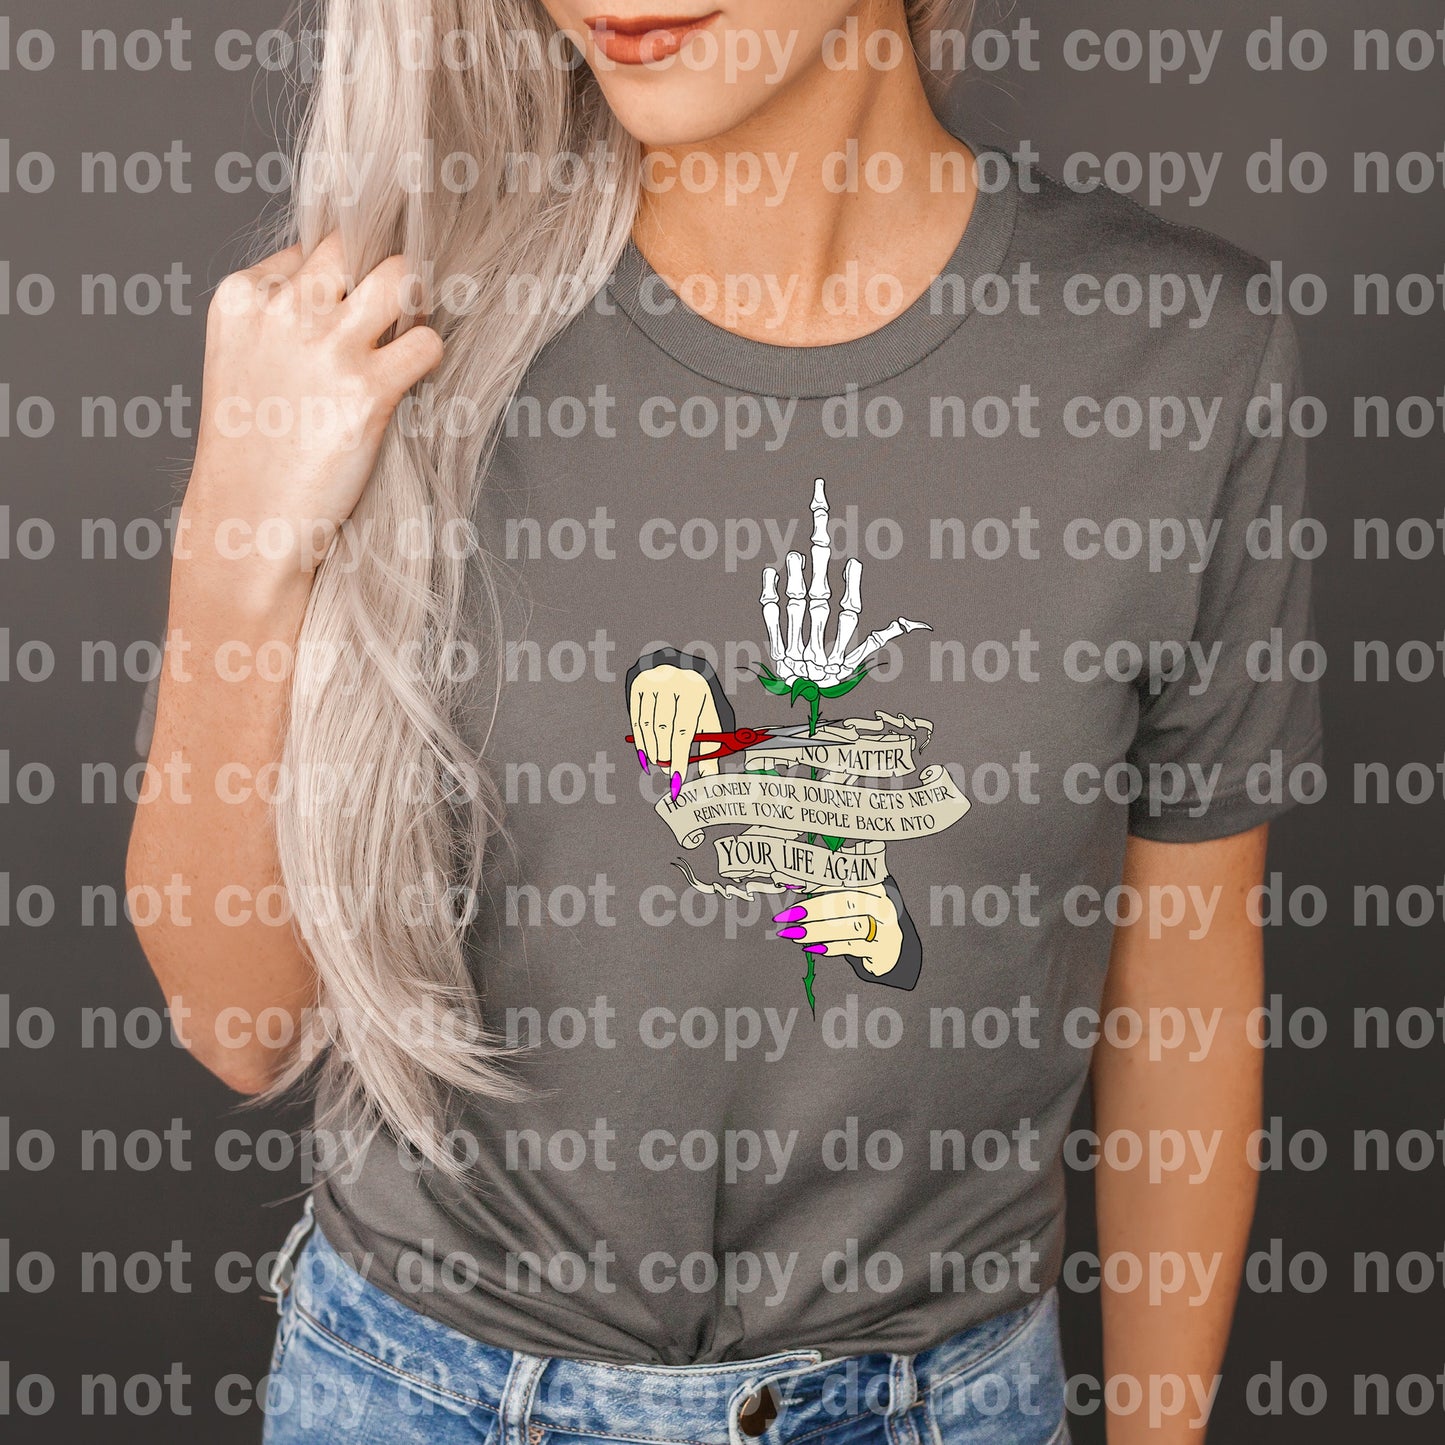 No Matter How Lonely Your Journey Gets Never Reinvite Toxic People Back Int Your Life Again Black/One Color/Purple Nails Dream Print or Sublimation Print